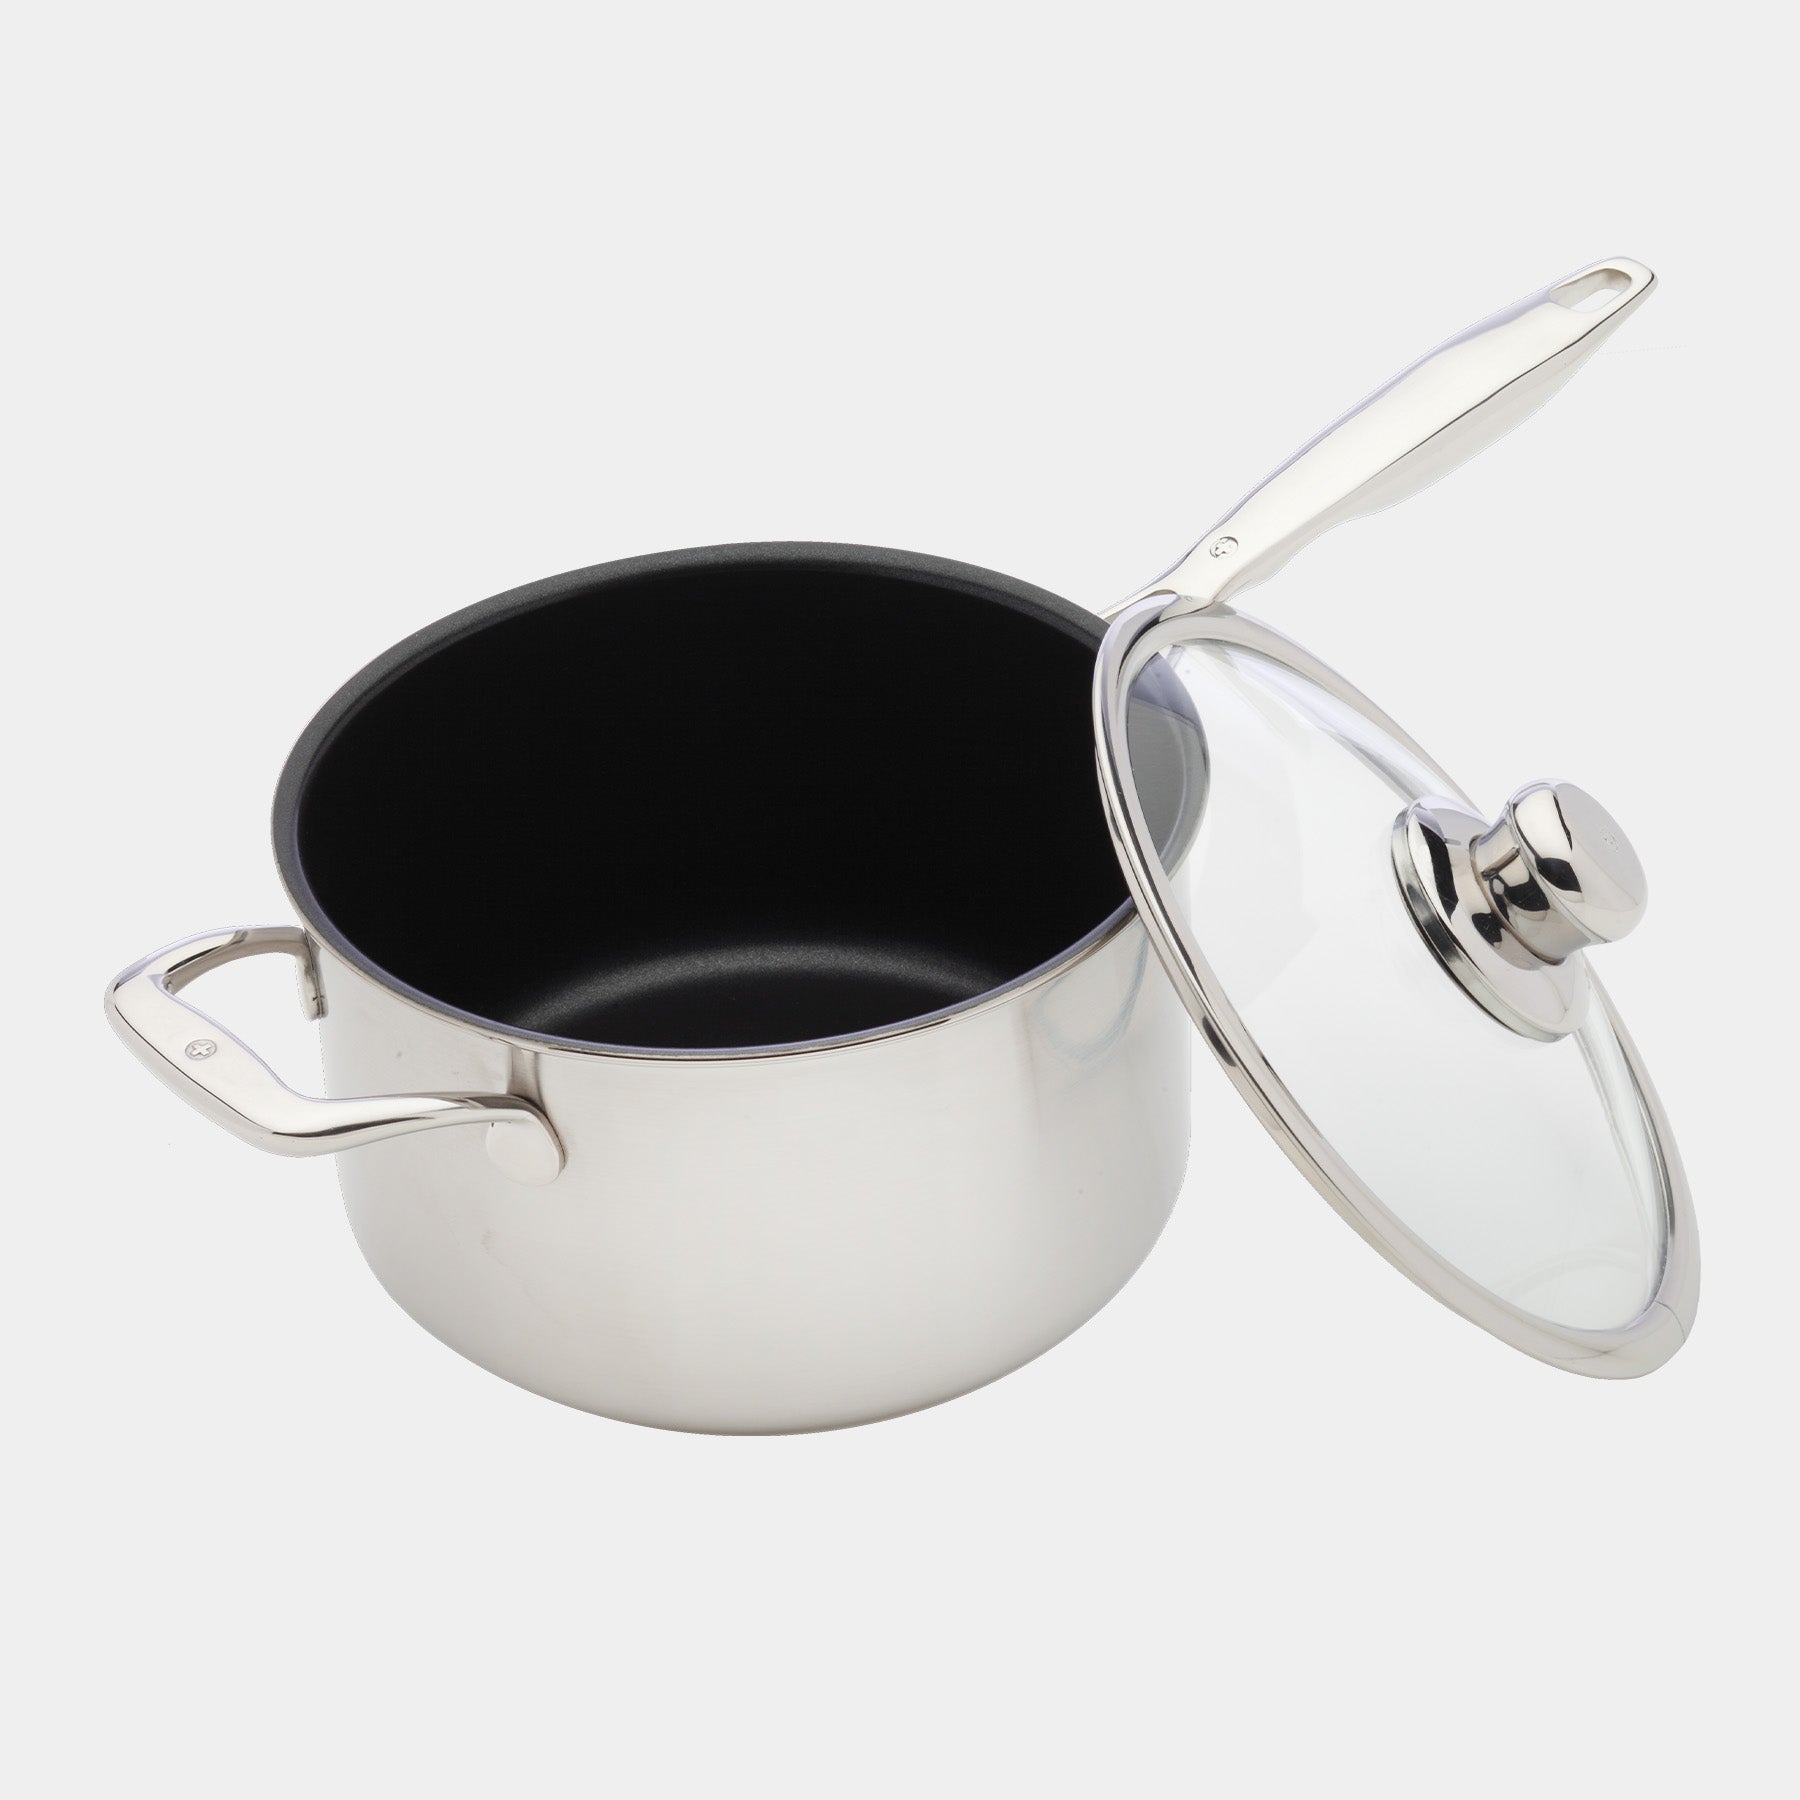 Nonstick Clad 3.6 qt Saucepan with Glass Lid - Induction